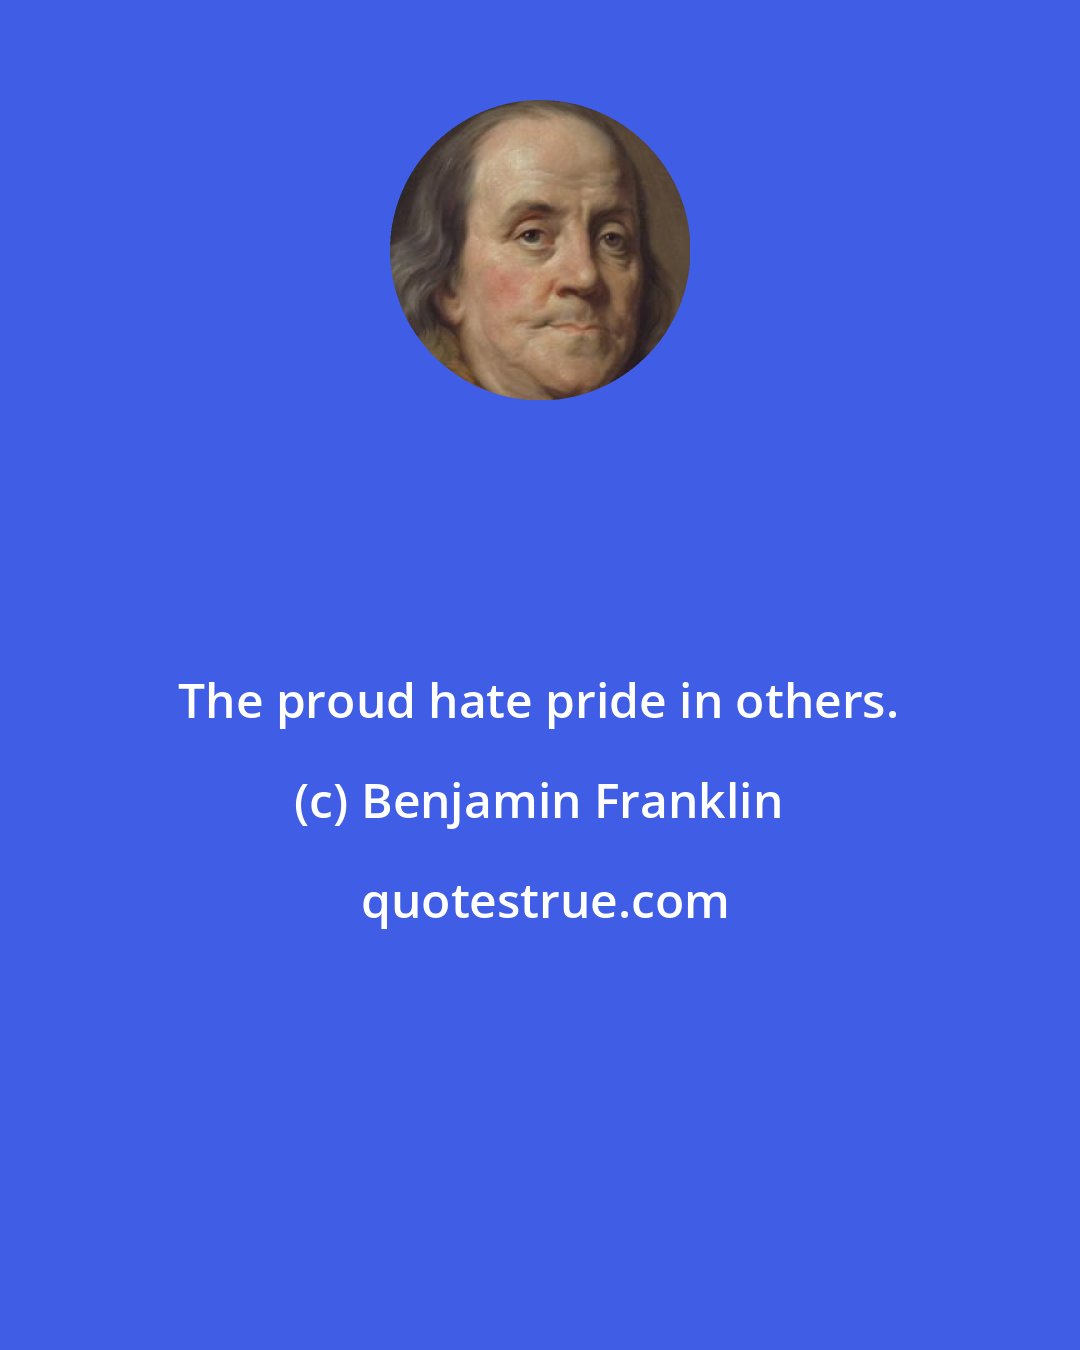 Benjamin Franklin: The proud hate pride in others.